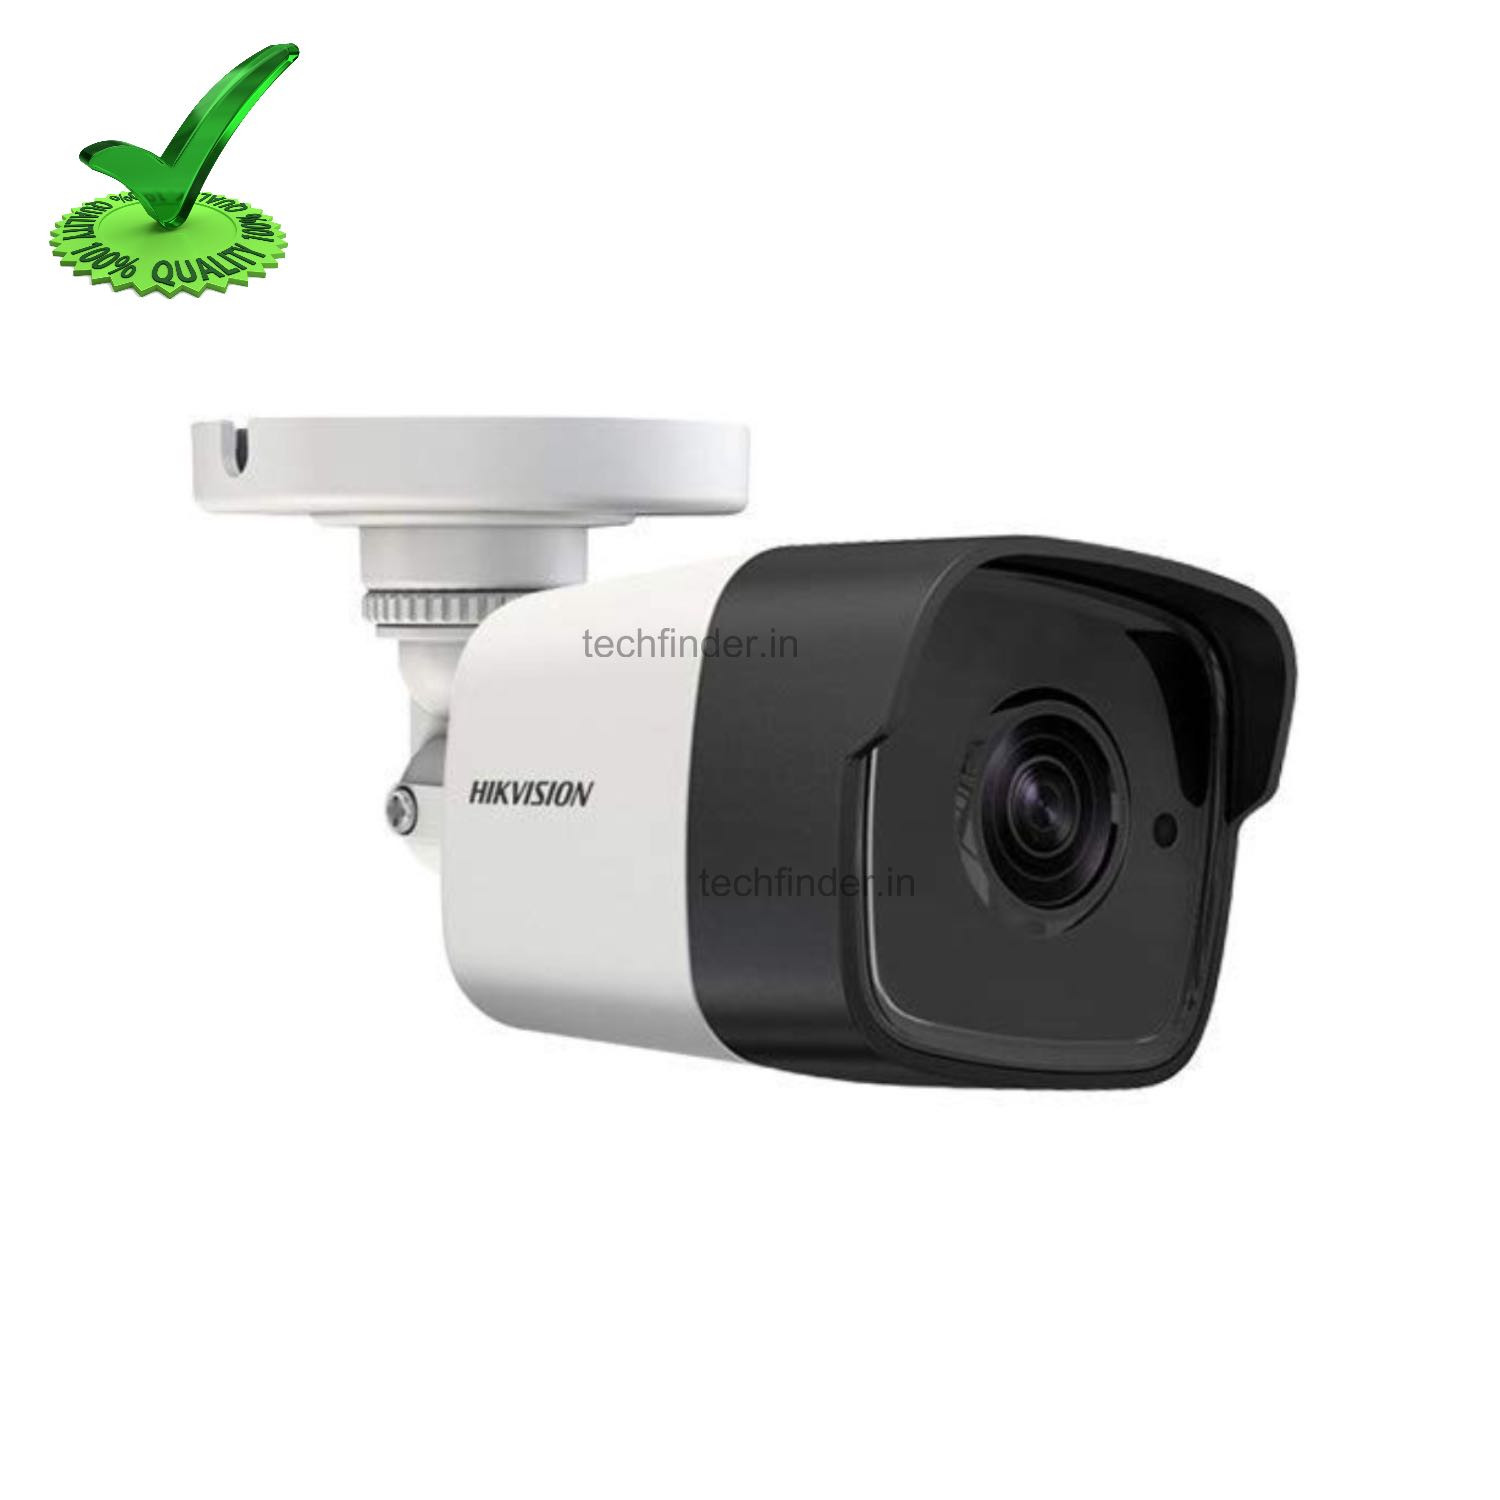 Hikvision DS-2CE16H0T-ITFS 5MP Fully Metal HD Bullet Camea